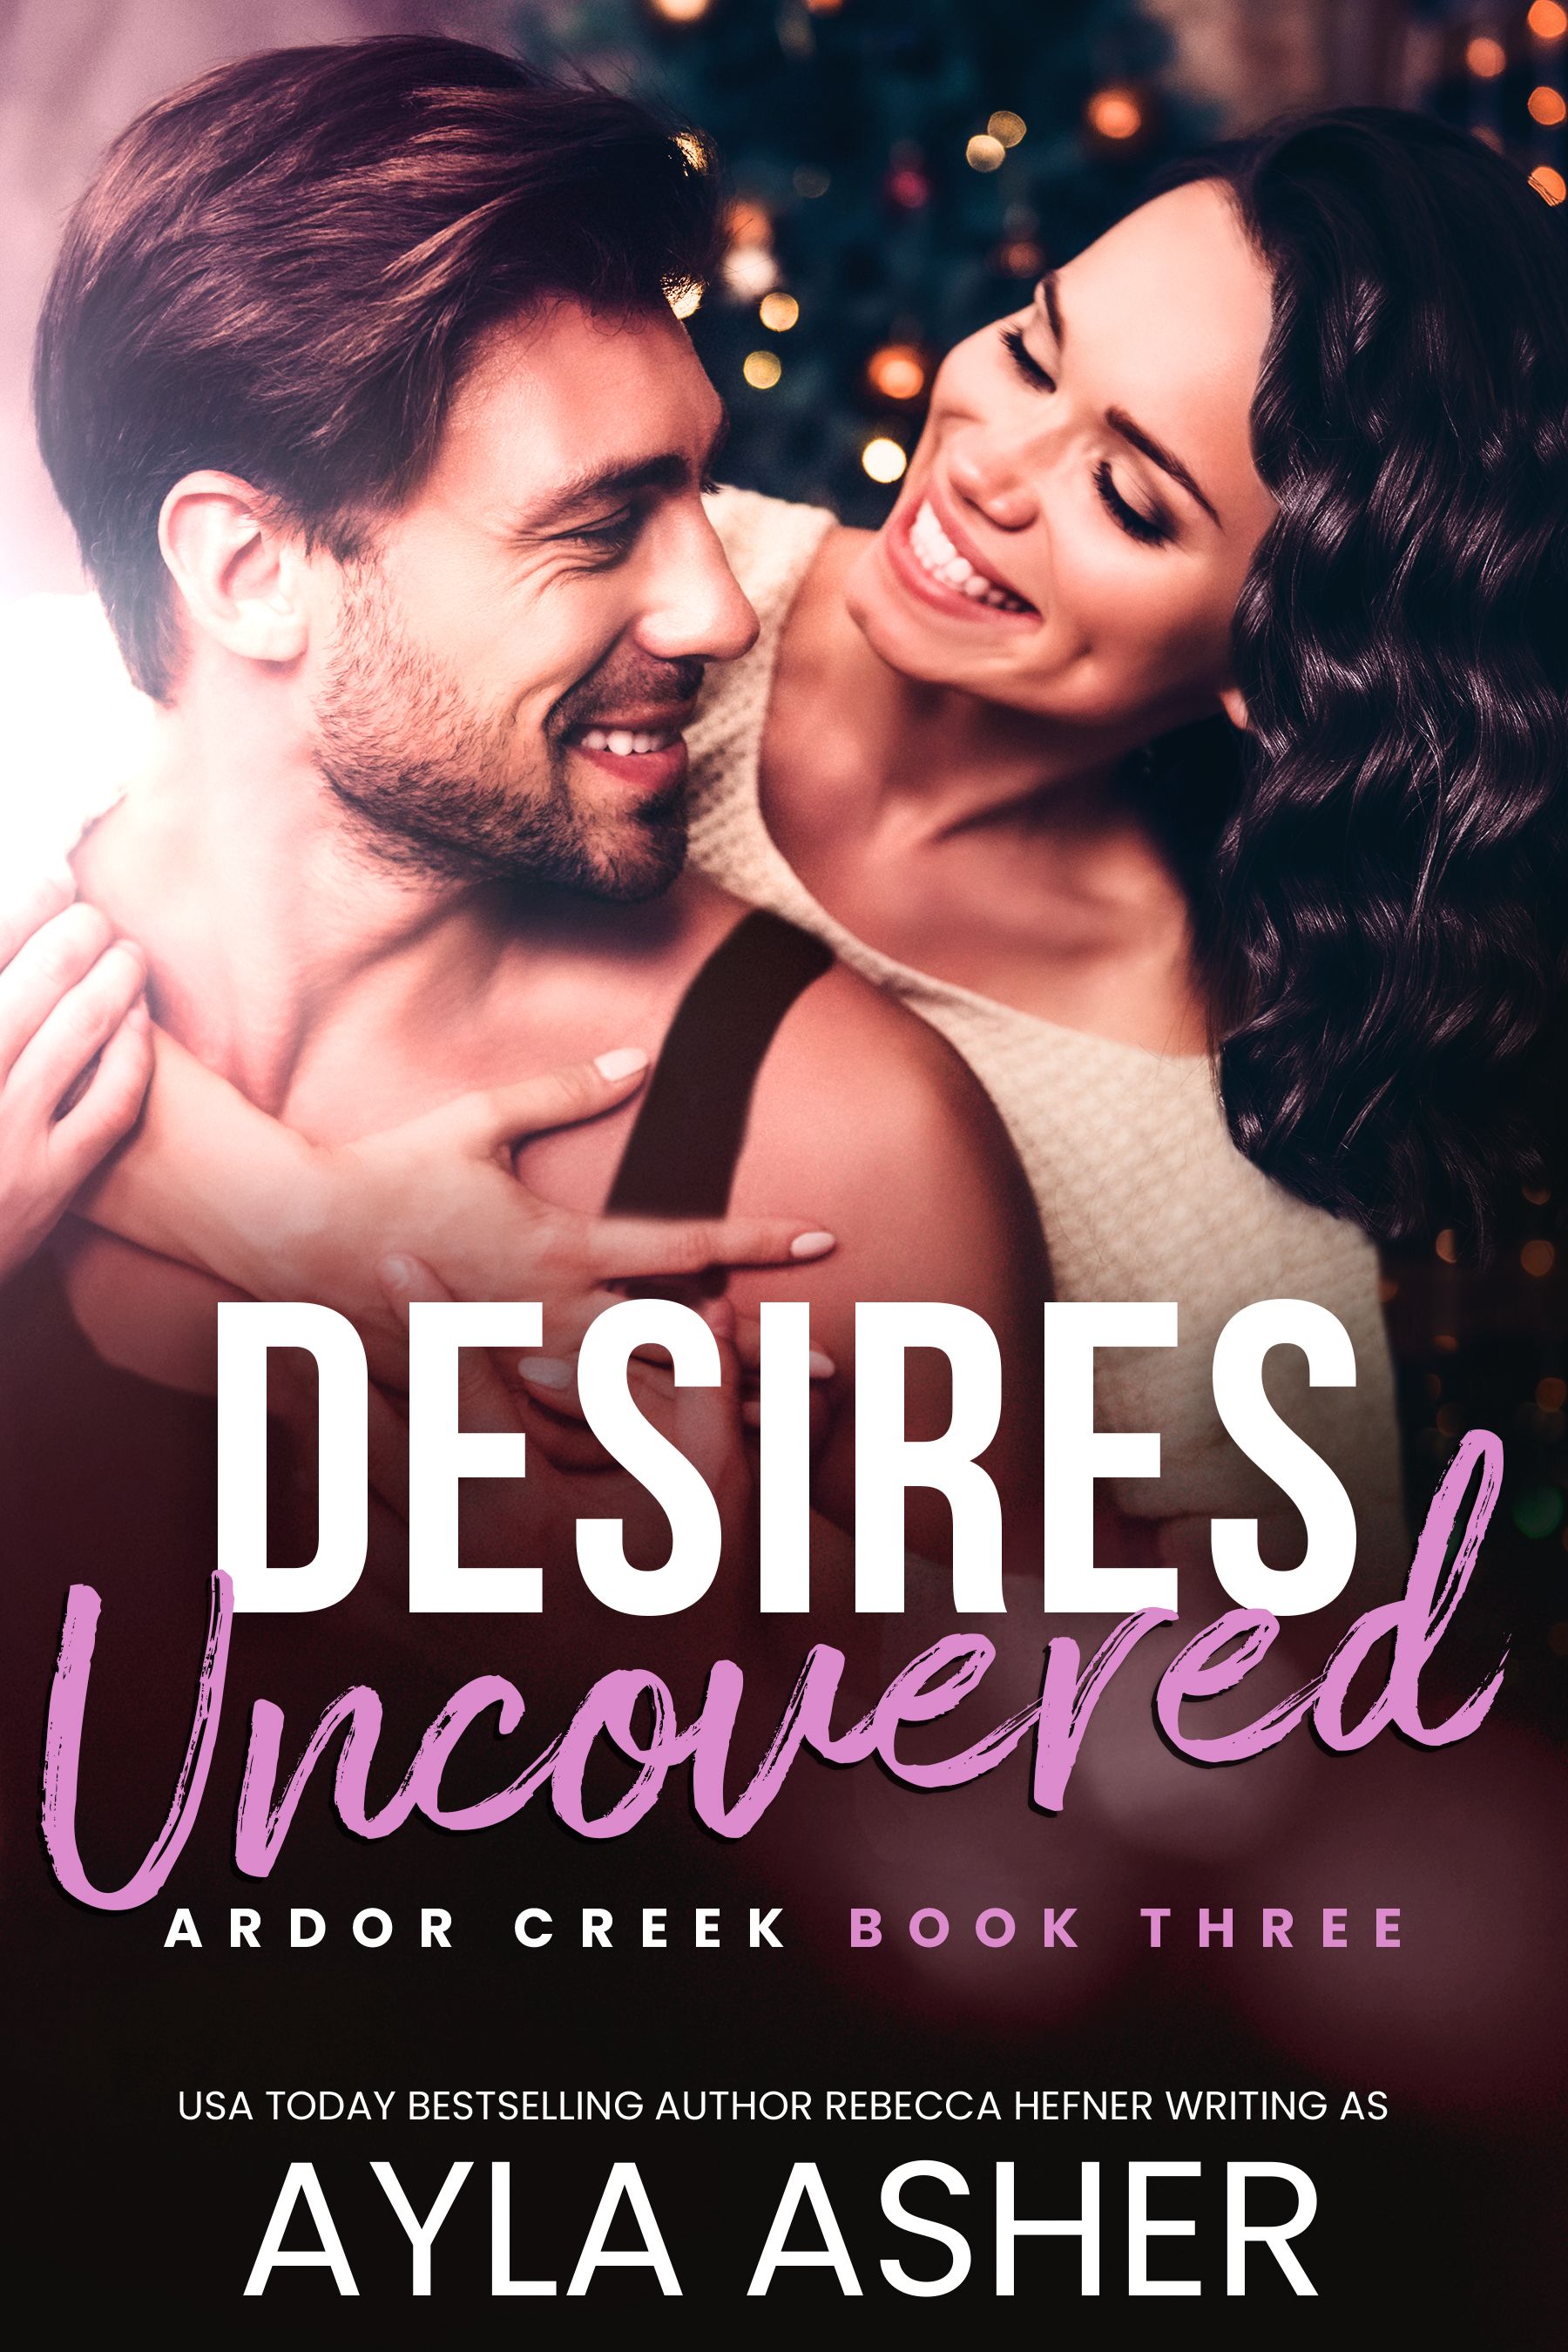 Desires Uncovered - Steamy Small-Town Romance by Ayla Asher